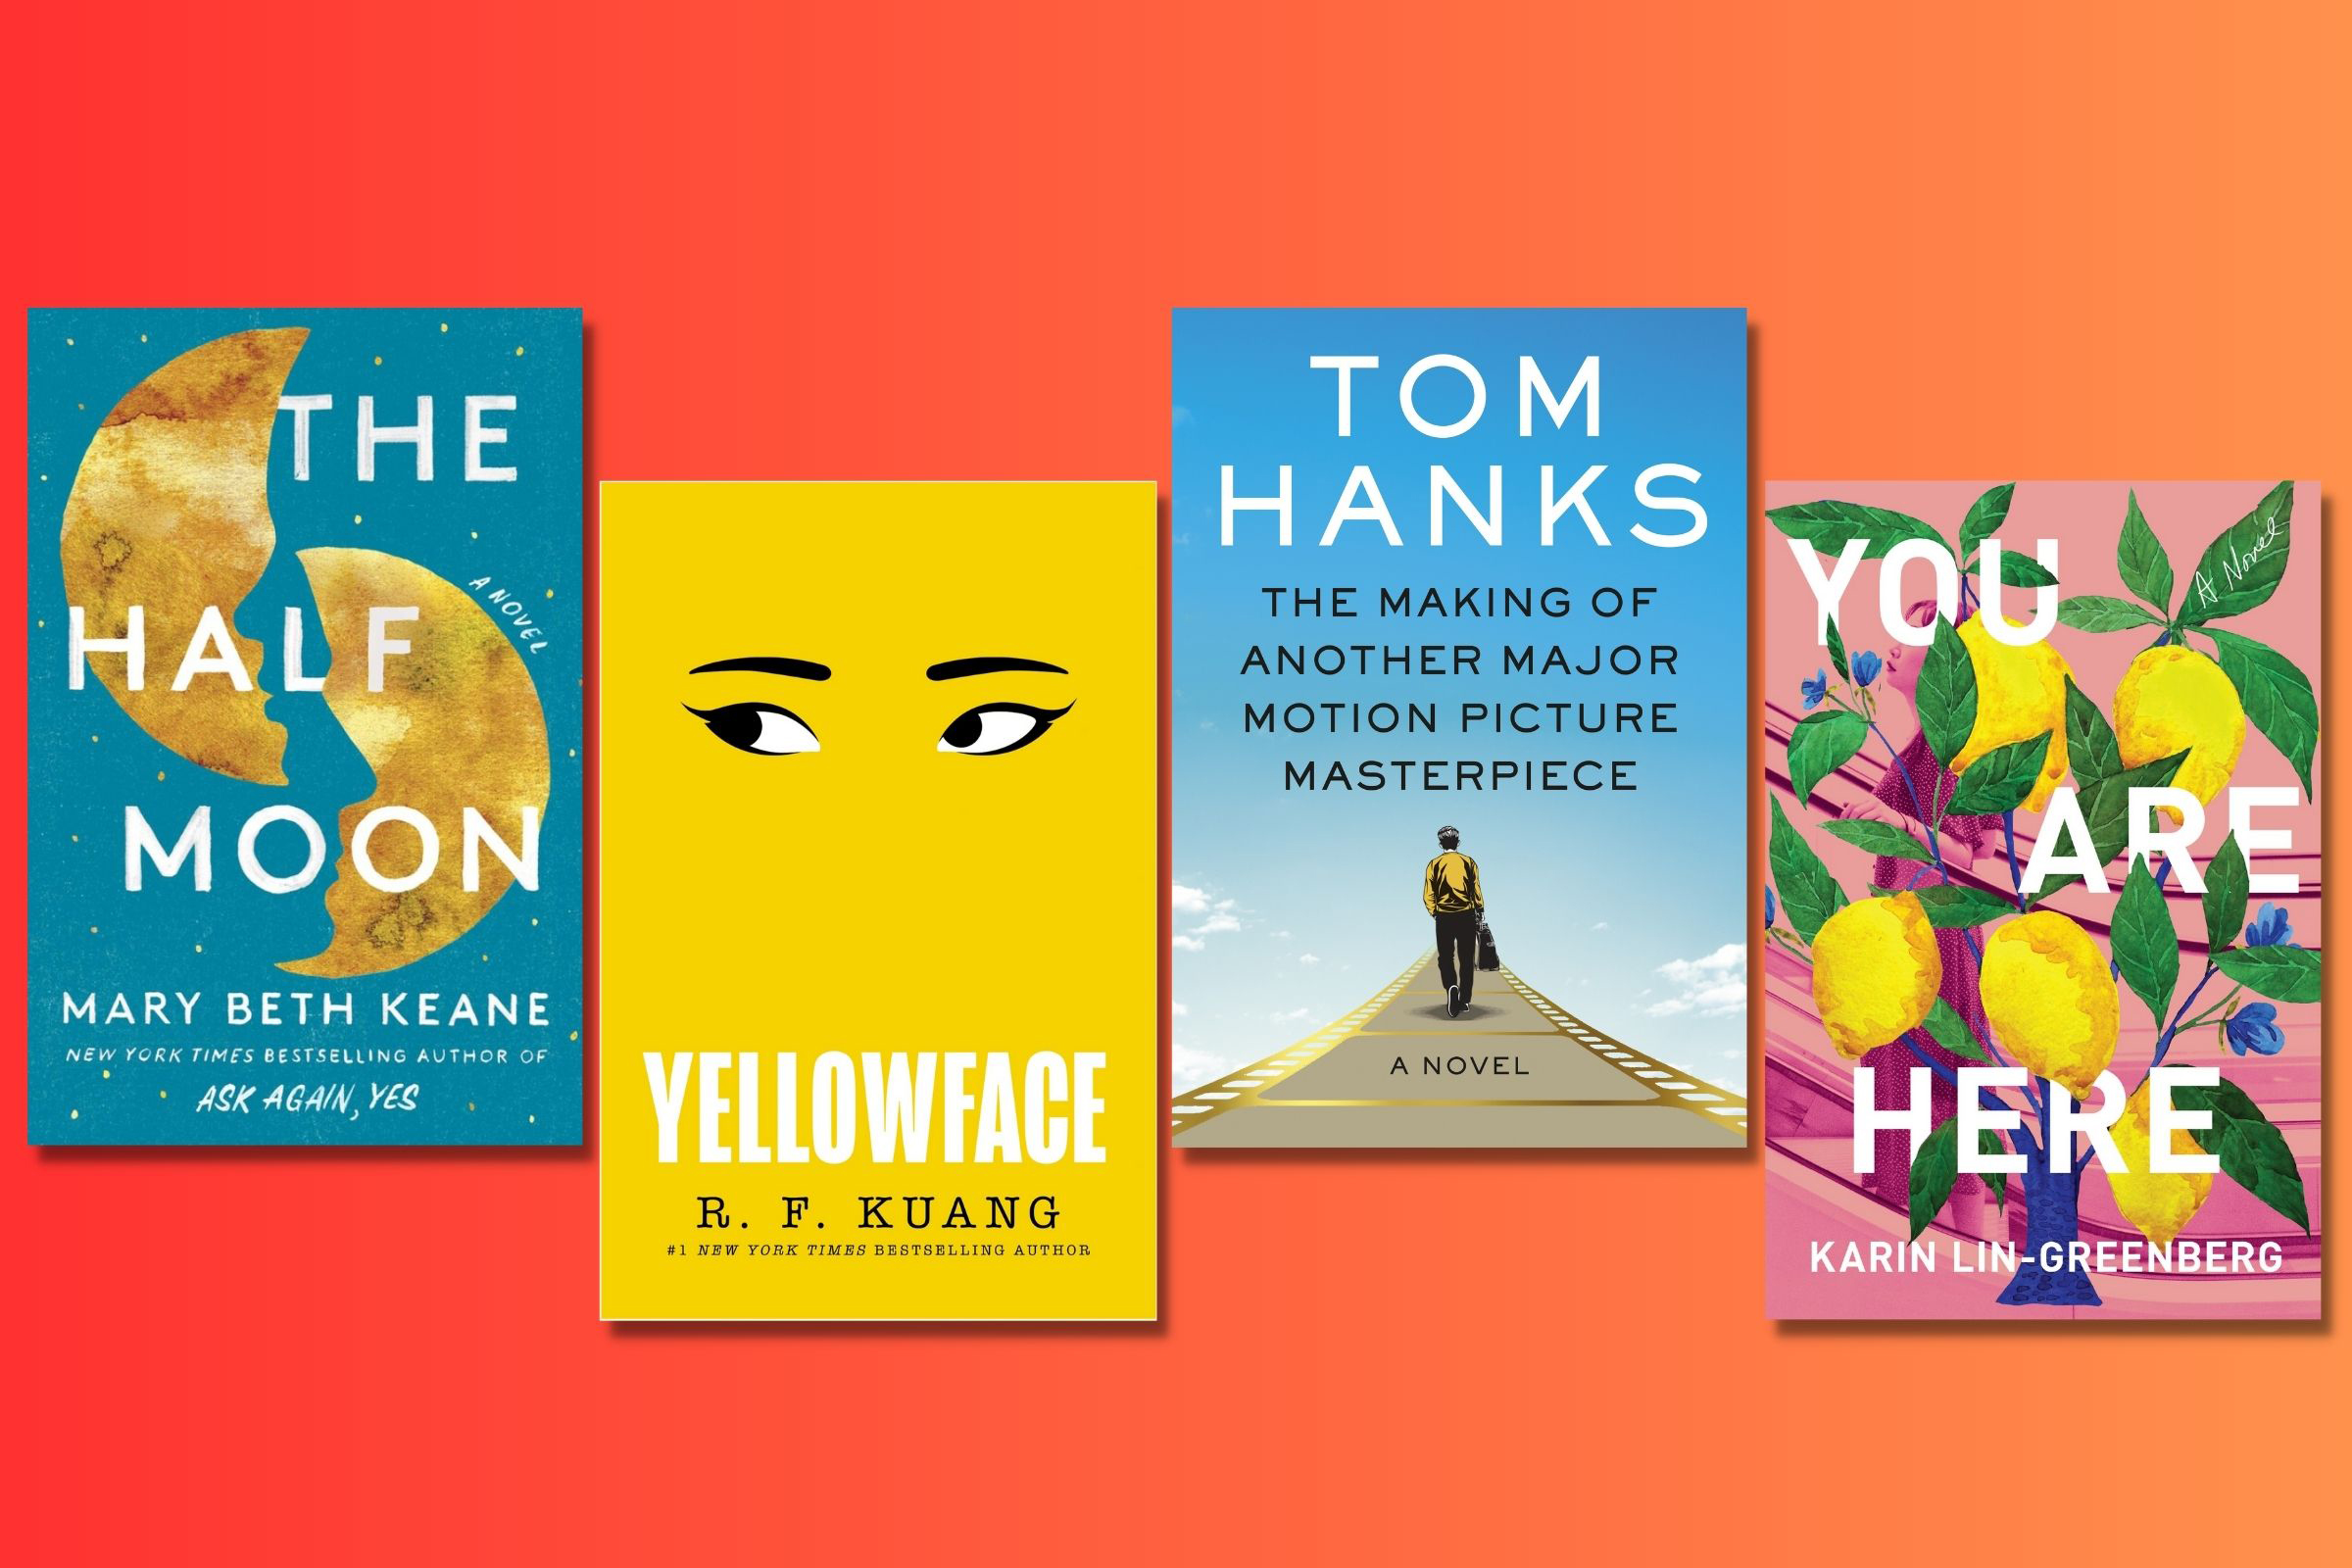 The most anticipated new books coming this month include a novel by Tom Hanks and a plagiarism thriller from R.F. Kuang